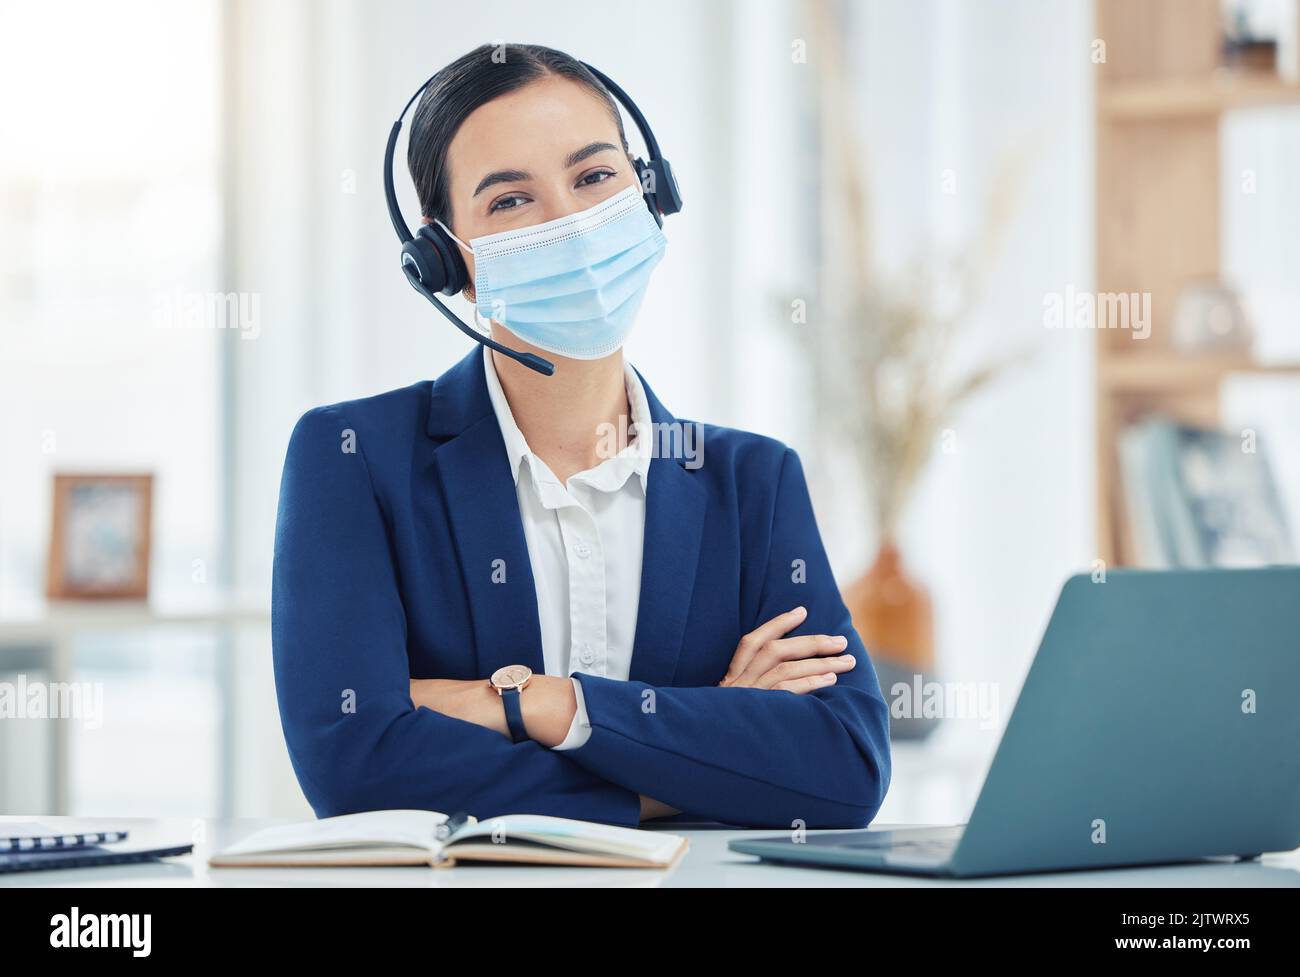 Covid, telemarketing and woman with mask portrait at a corporate work building in the pandemic. Help desk worker at table with medical face protection Stock Photo